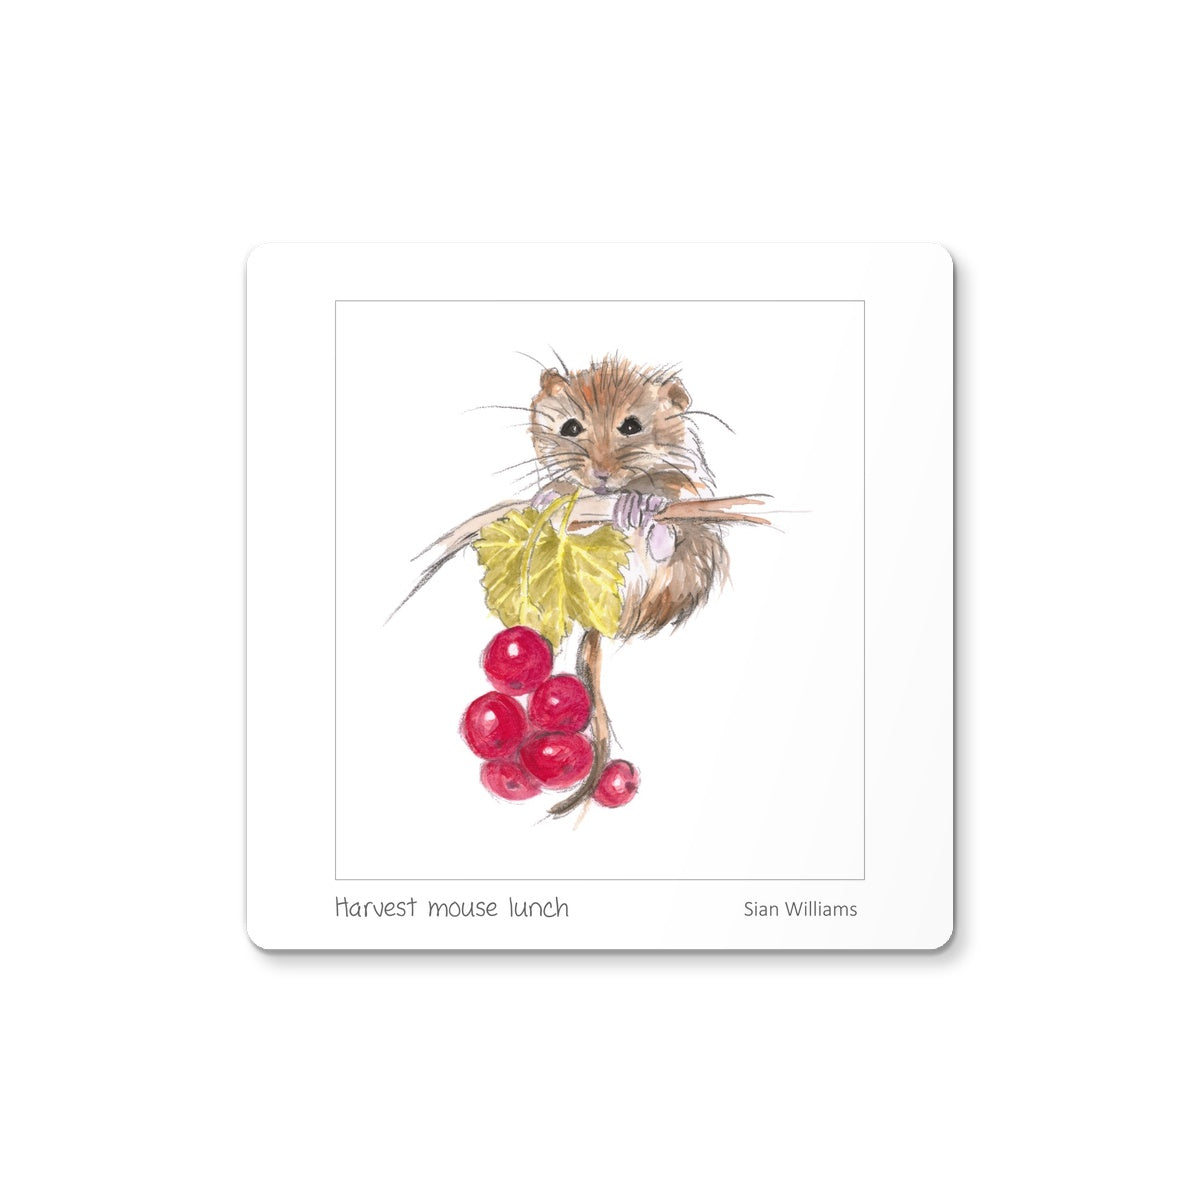 'Harvest mouse lunch' Coaster